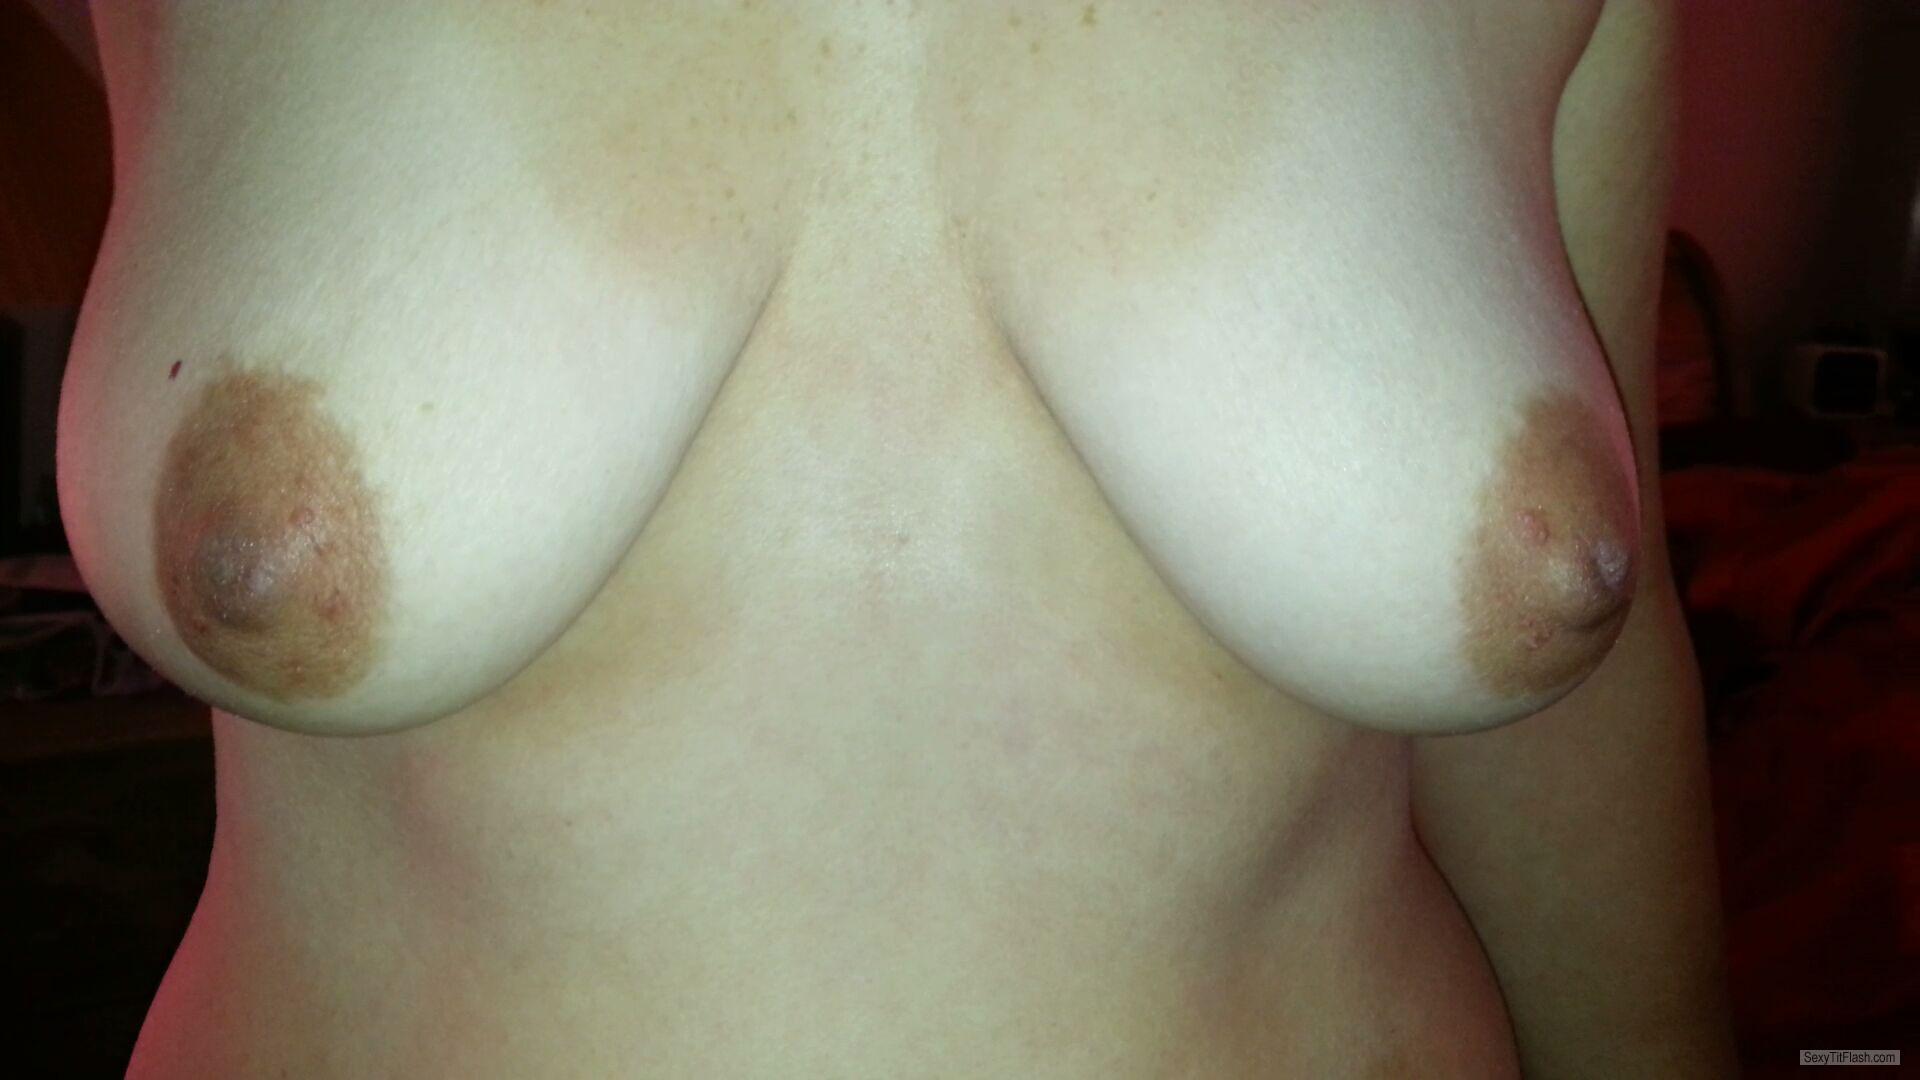 Tit Flash: Wife's Medium Tits - FYI from United States